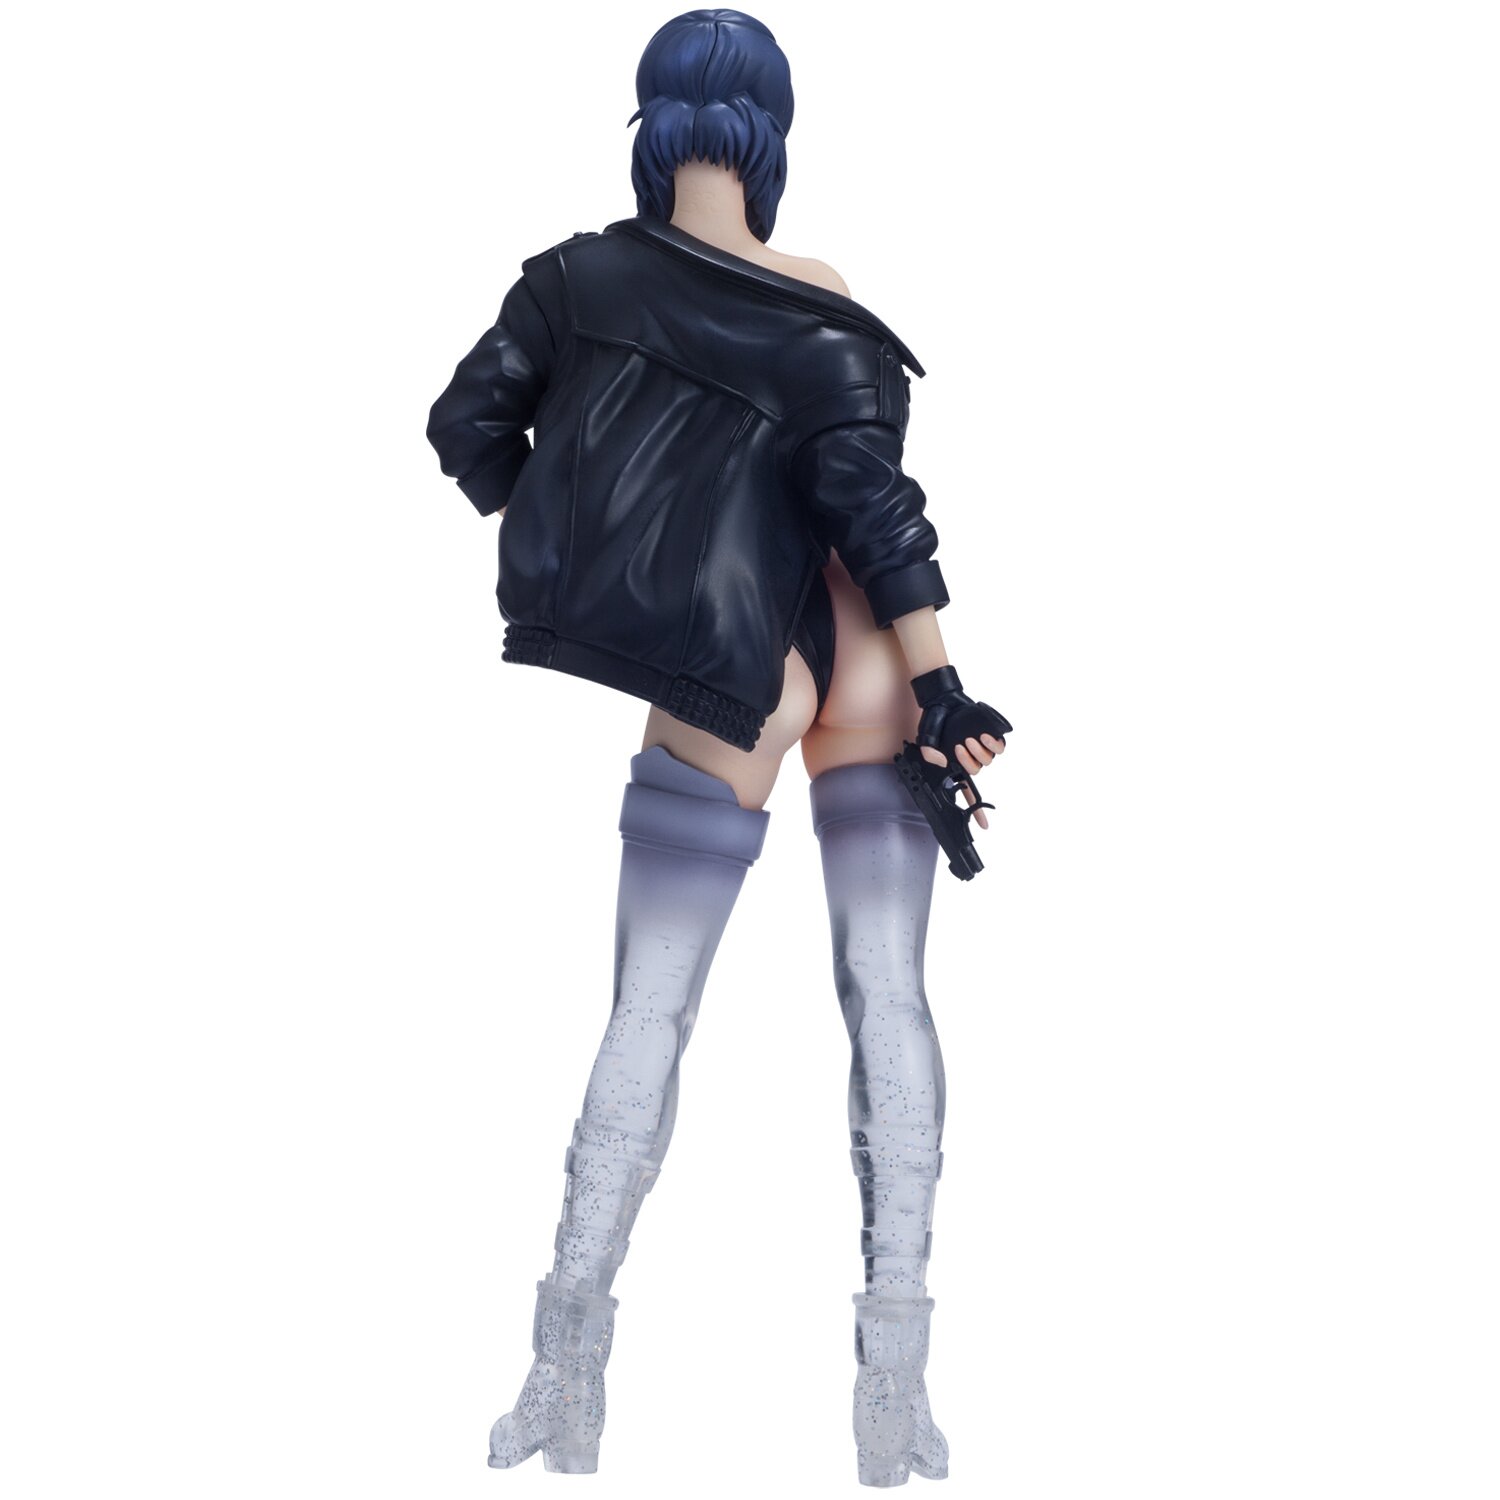 Hdge Technical Statue No. 6: Motoko Kusanagi Optical Camouflage Ver. |  Ghost in the Shell: S.A.C.